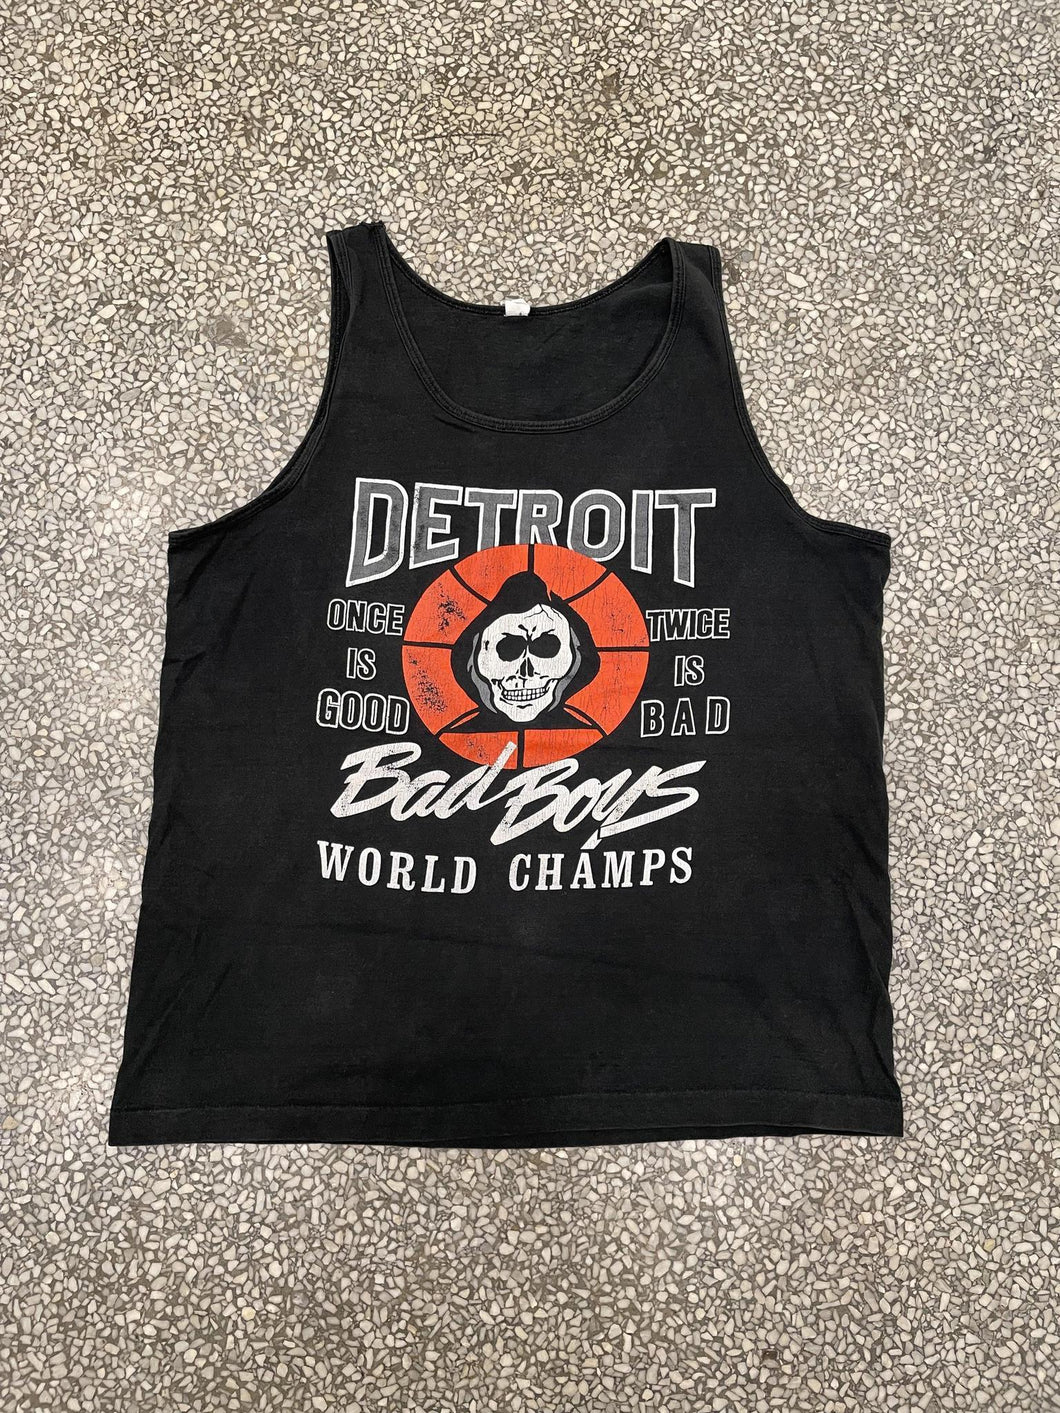 Detroit Pistons Bad Boys Once Is Good, Twice is Bad World Champs Spooky Bootleg Skeleton Logo Tank Top ABC Vintage 